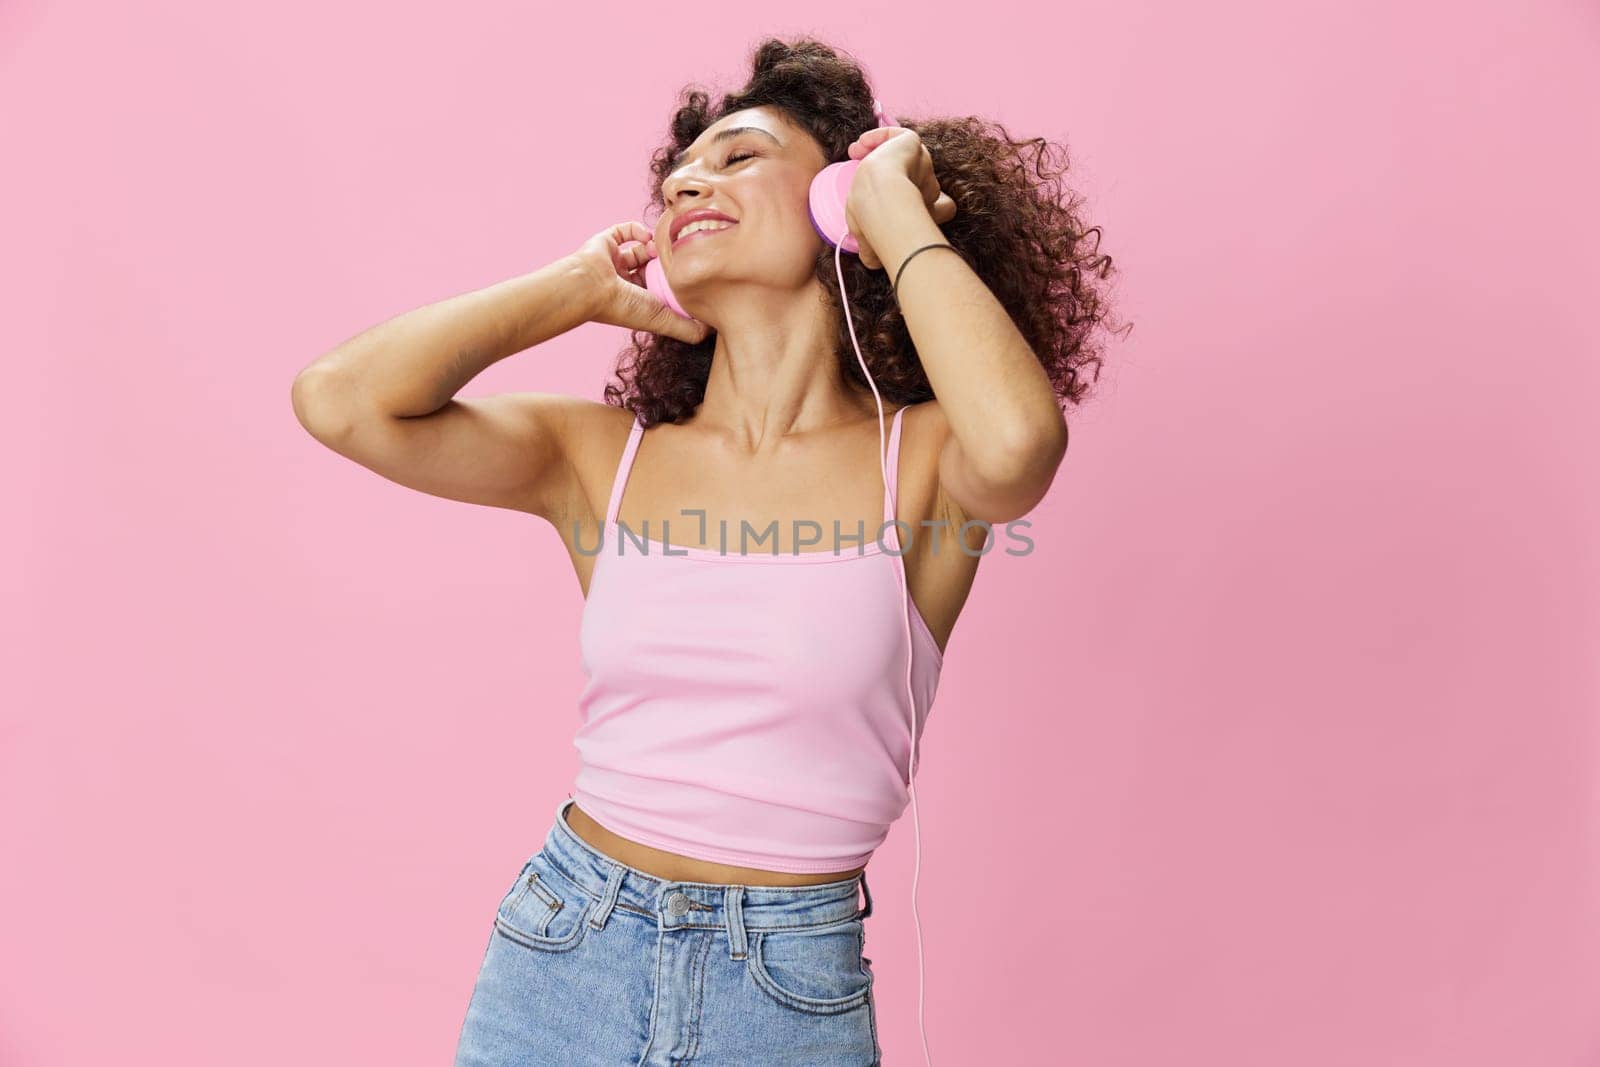 Happy woman wearing headphones with curly hair listening to music and dancing in a pink T-shirt and jeans on a pink background, copy space by SHOTPRIME